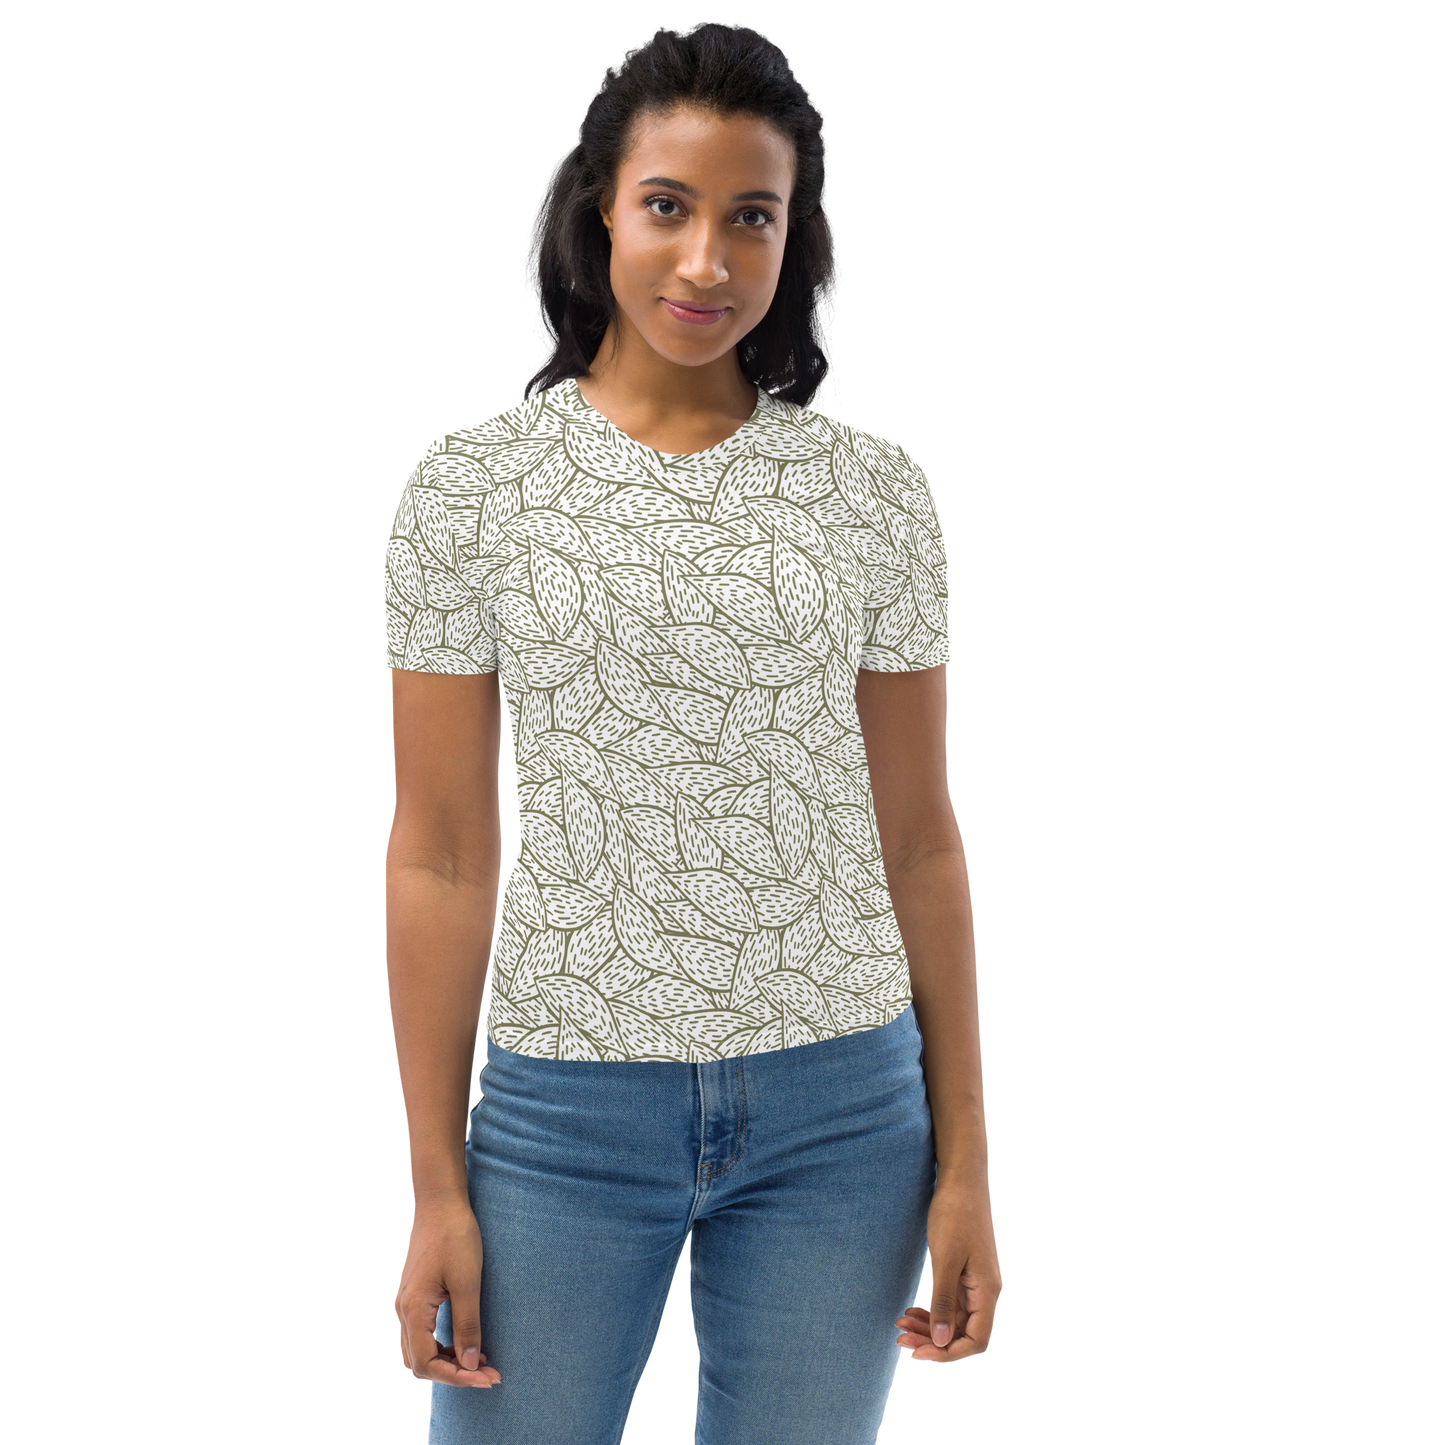 Colorful Fall Leaves | Seamless Patterns | All-Over Print Women's Crew Neck T-Shirt - #6